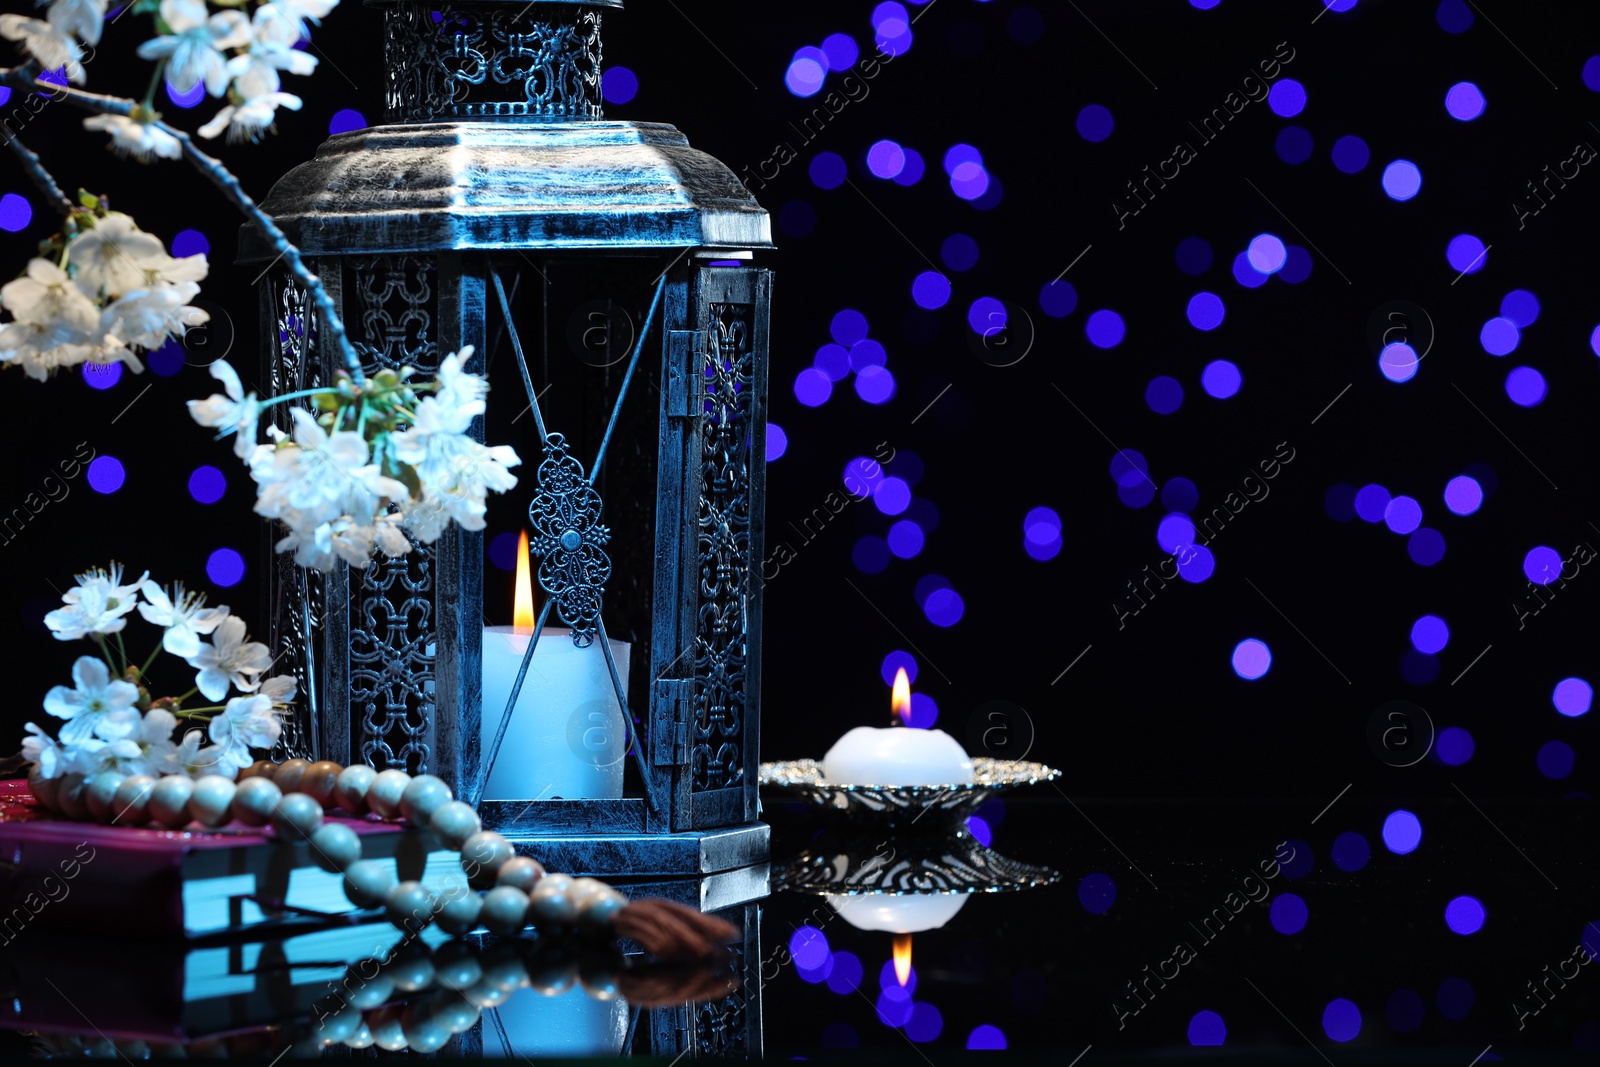 Photo of Arabic lantern, Quran, misbaha, burning candle and flowers on mirror surface against blurred lights at night. Space for text